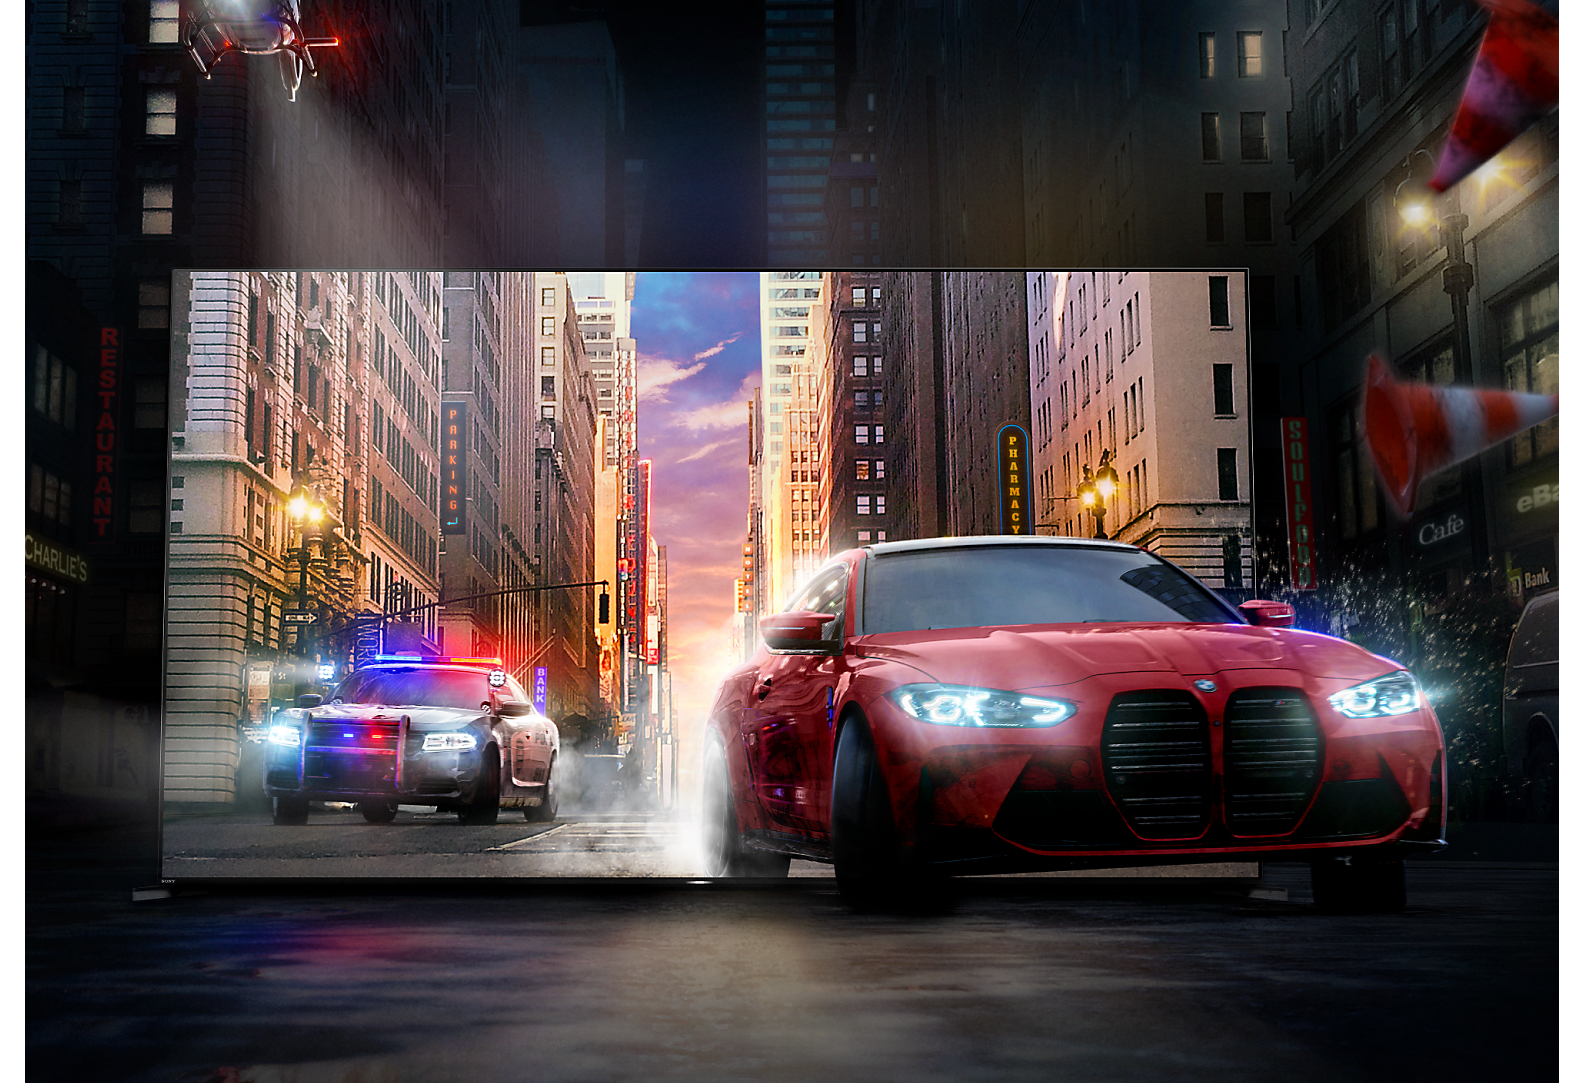 A red car followed by a police car driving out of a BRAVIA TV screen onto a city street